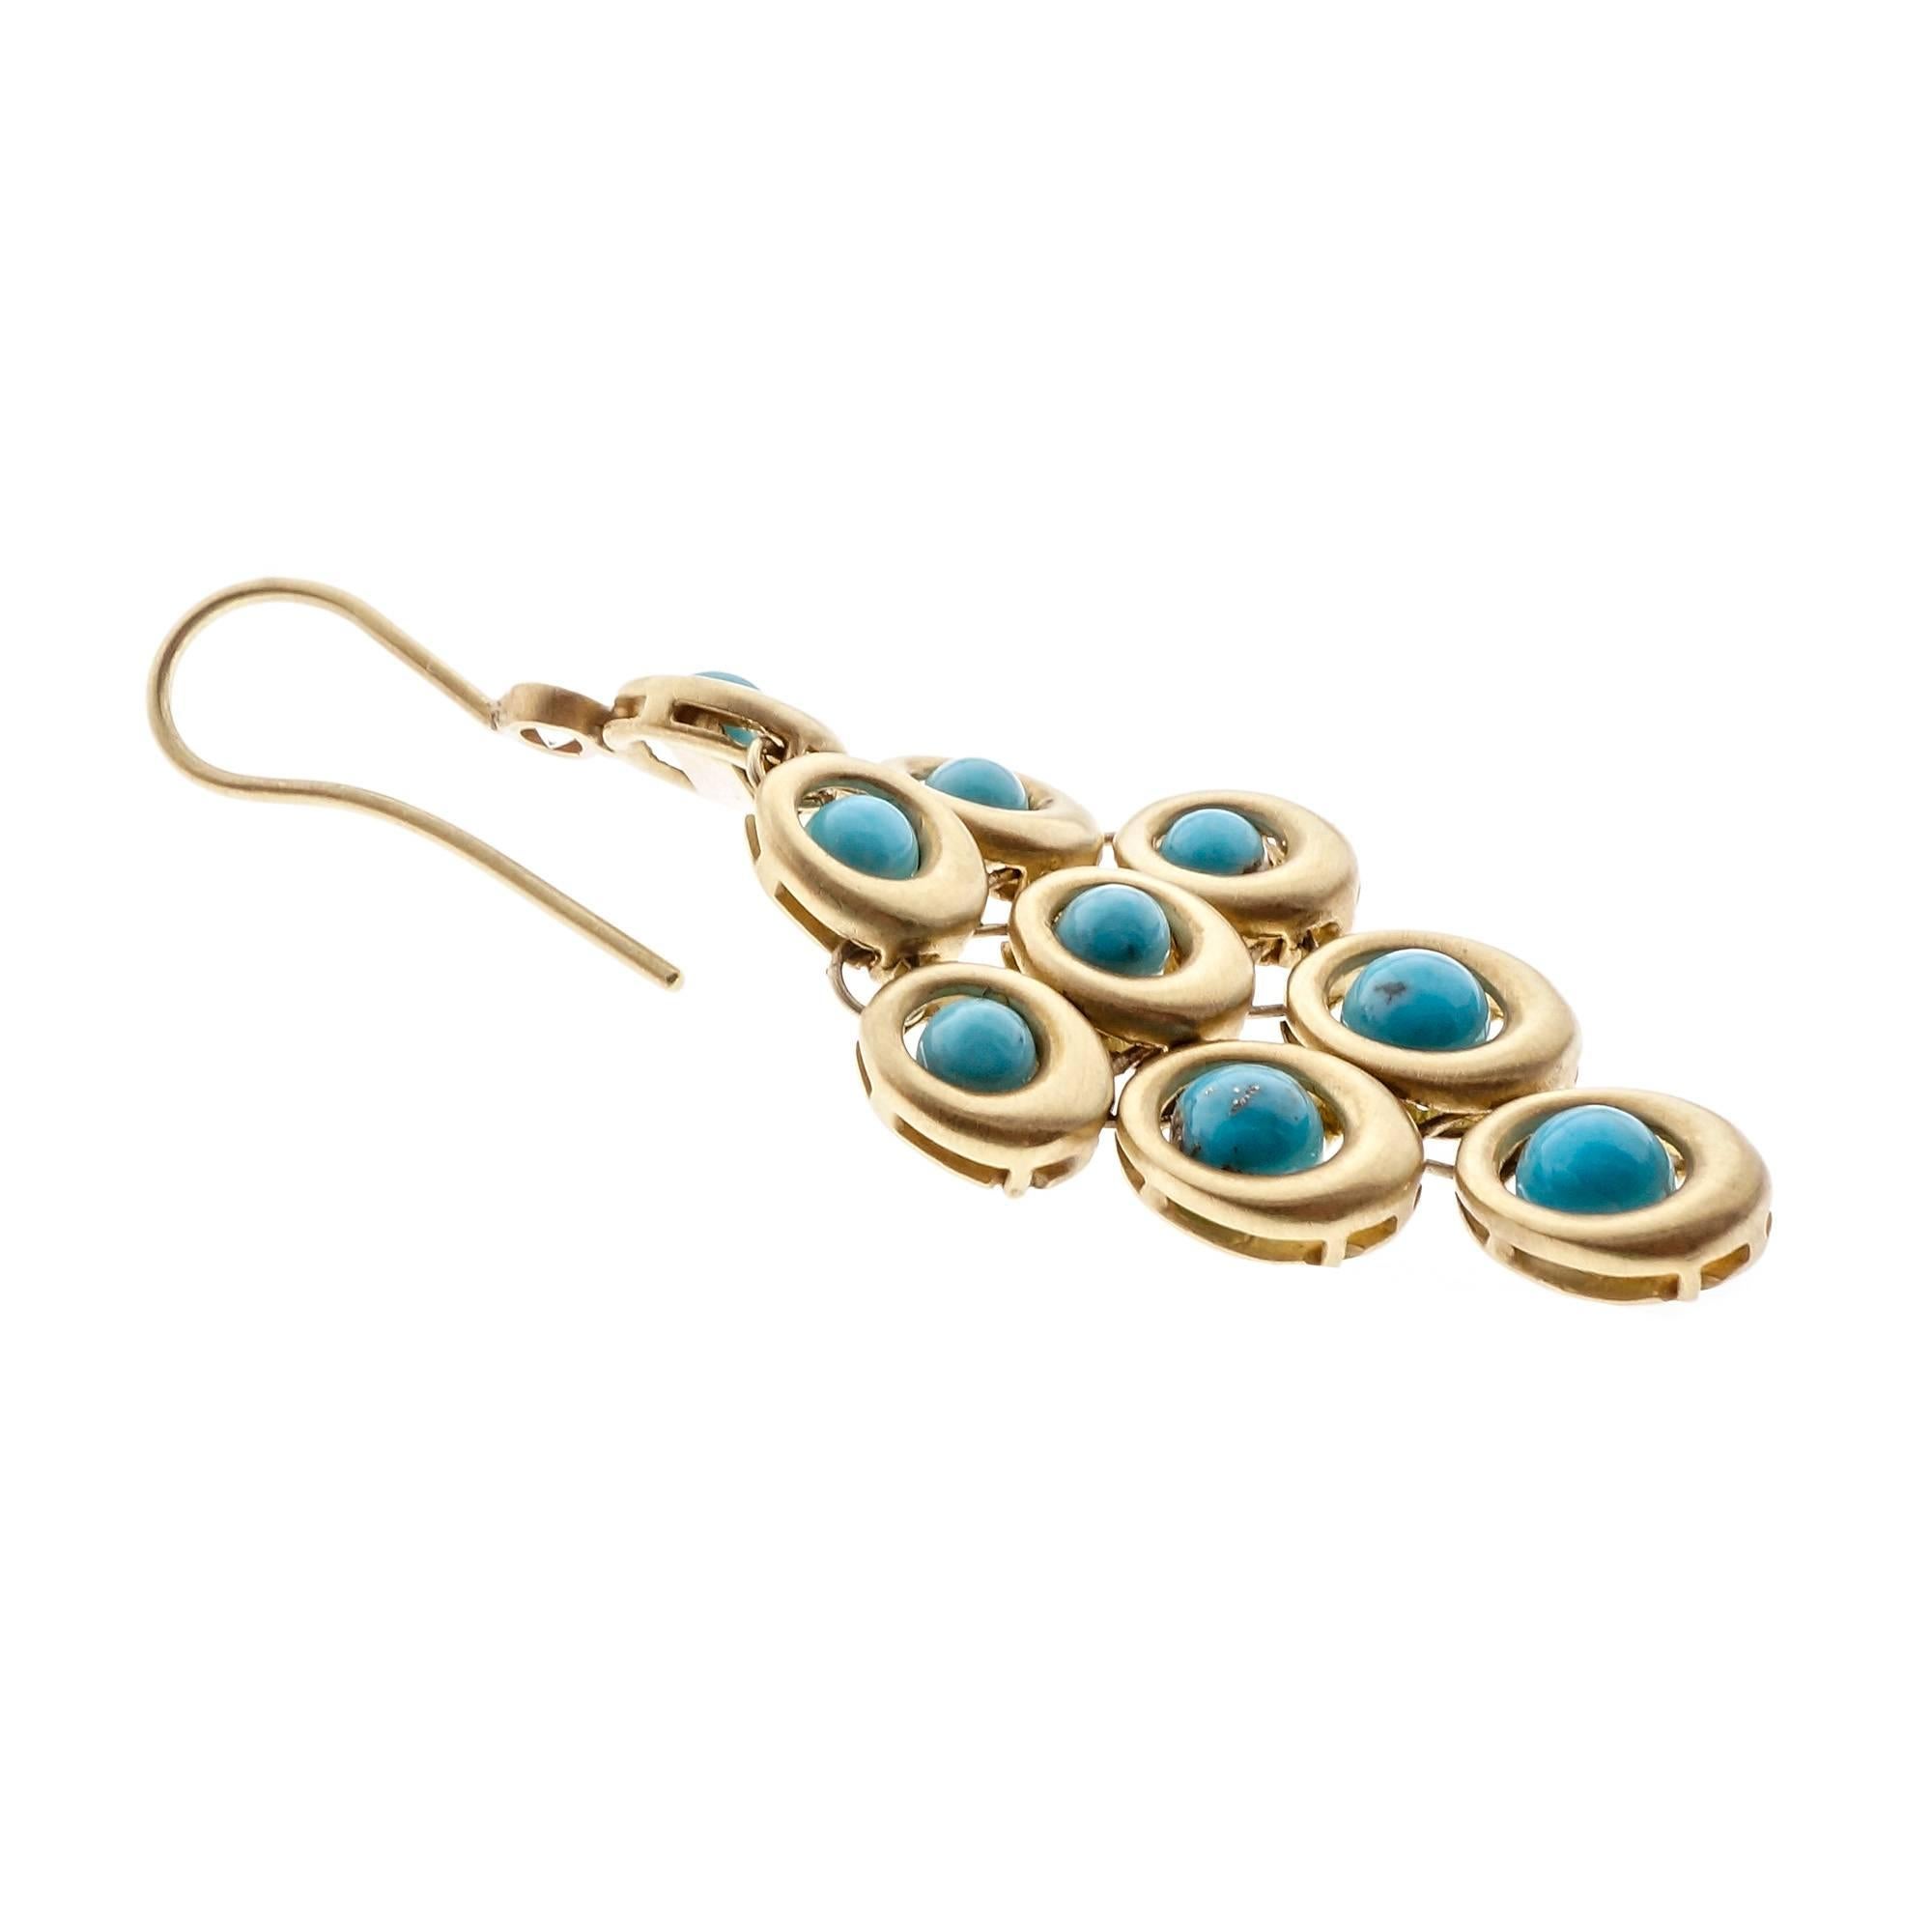 1970’s 18k yellow gold dull finish dangle earrings with GIA certified natural Turquoise in hinged flexible settings with sparkly Diamond accents. Polymer infused for lustré. This was often done to natural Turquoise in the 1970’s. 

18 round natural